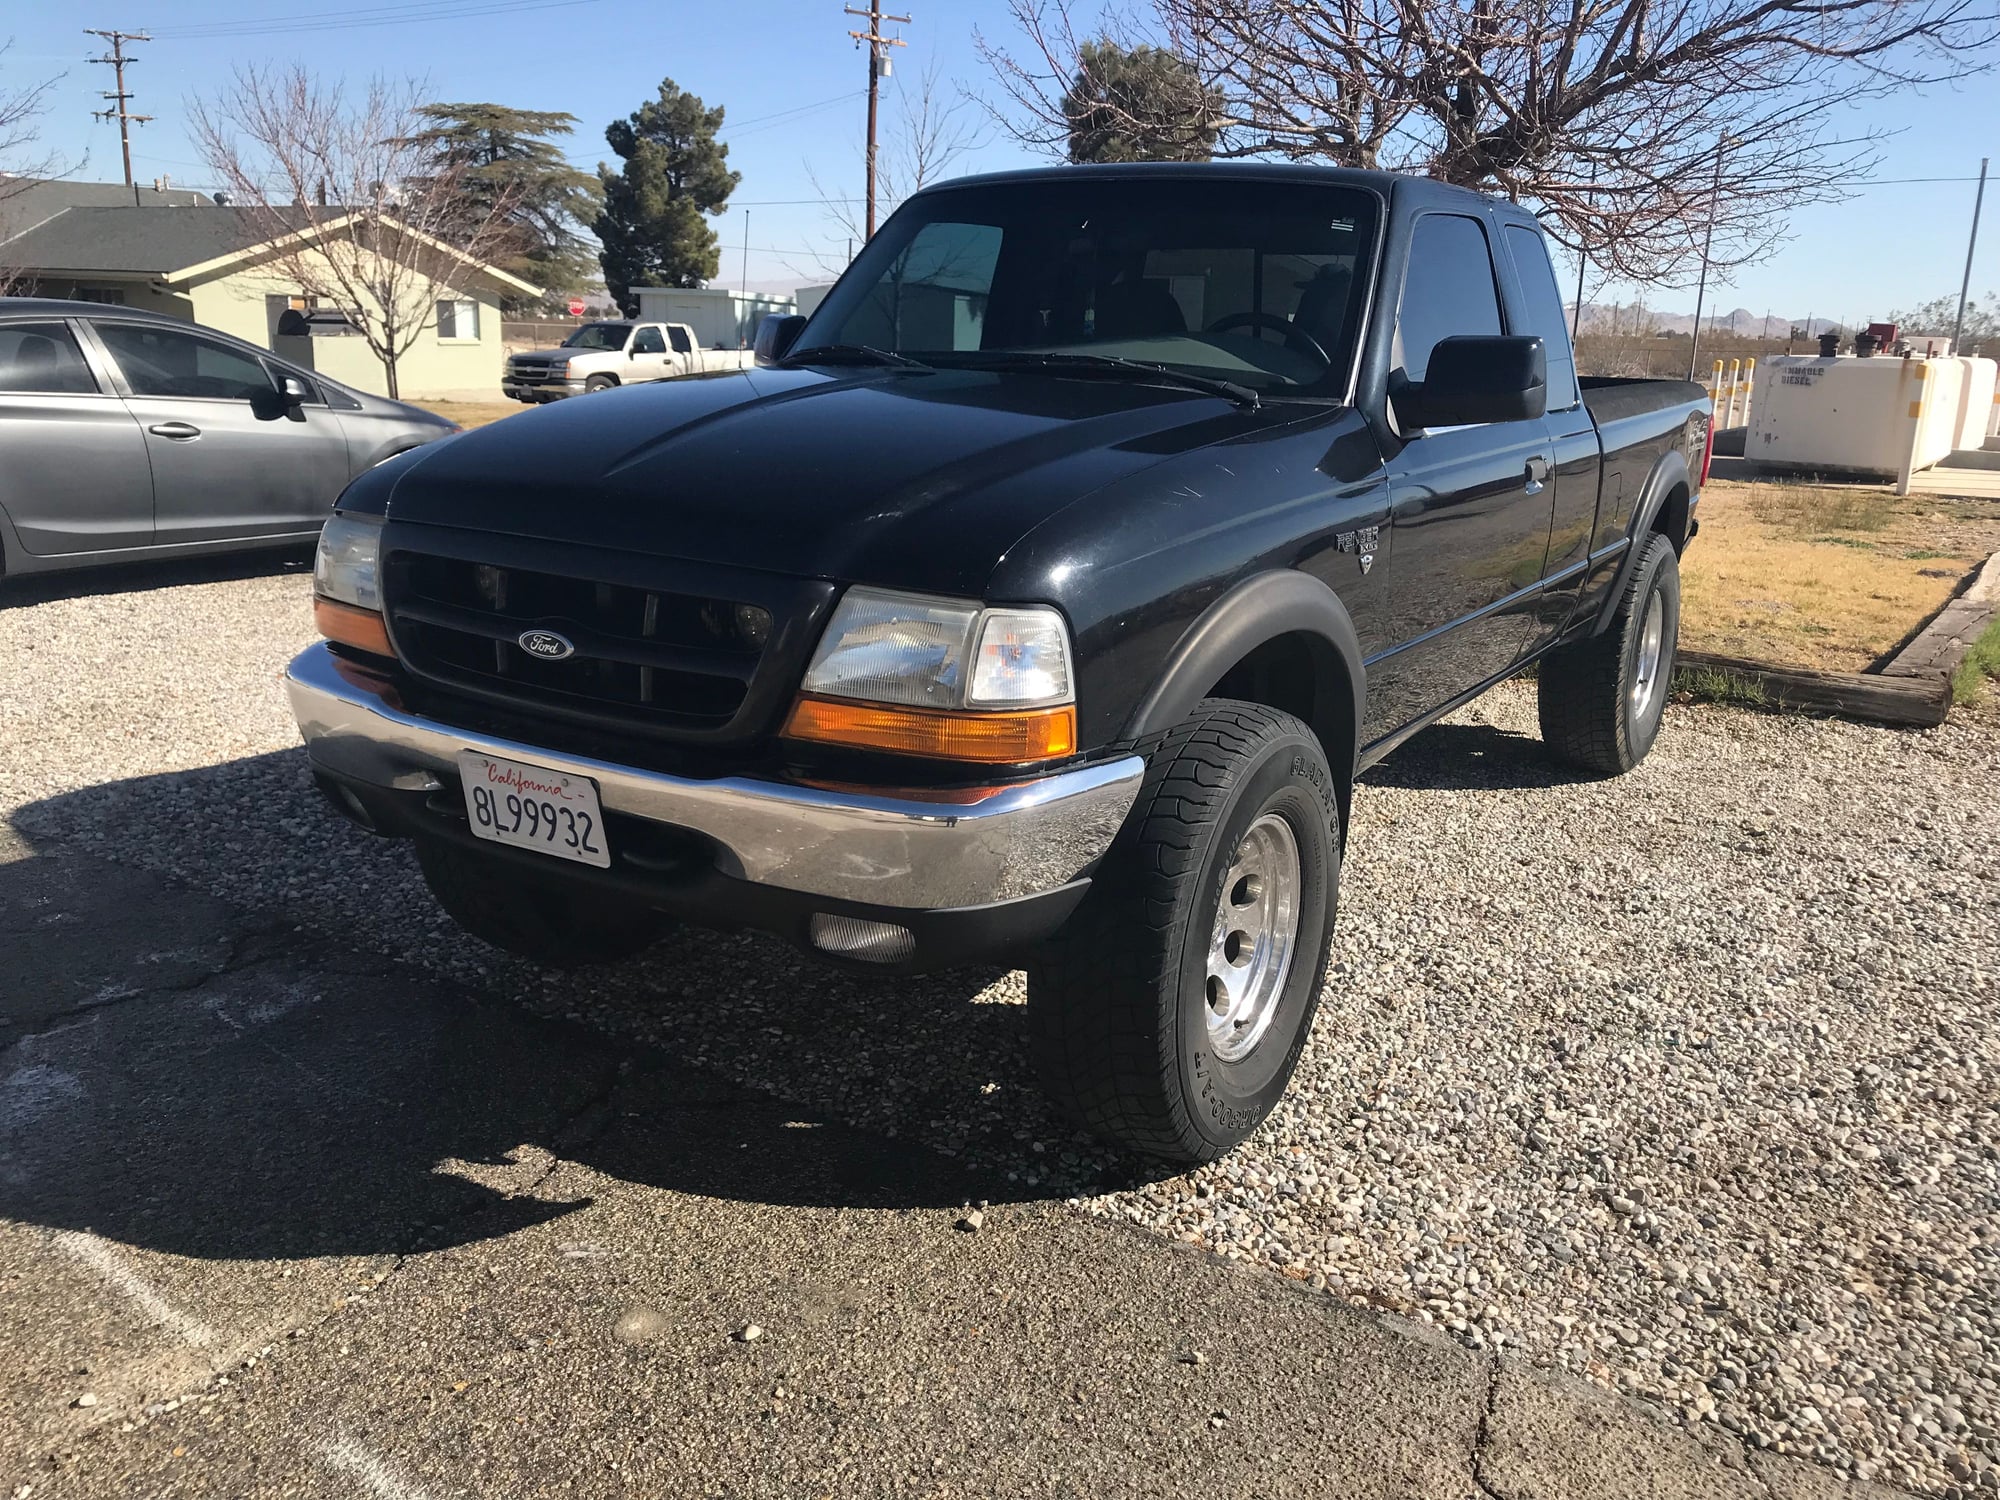 Checking Interest 2000 Ford Ranger Xlt 4 0l Automatic